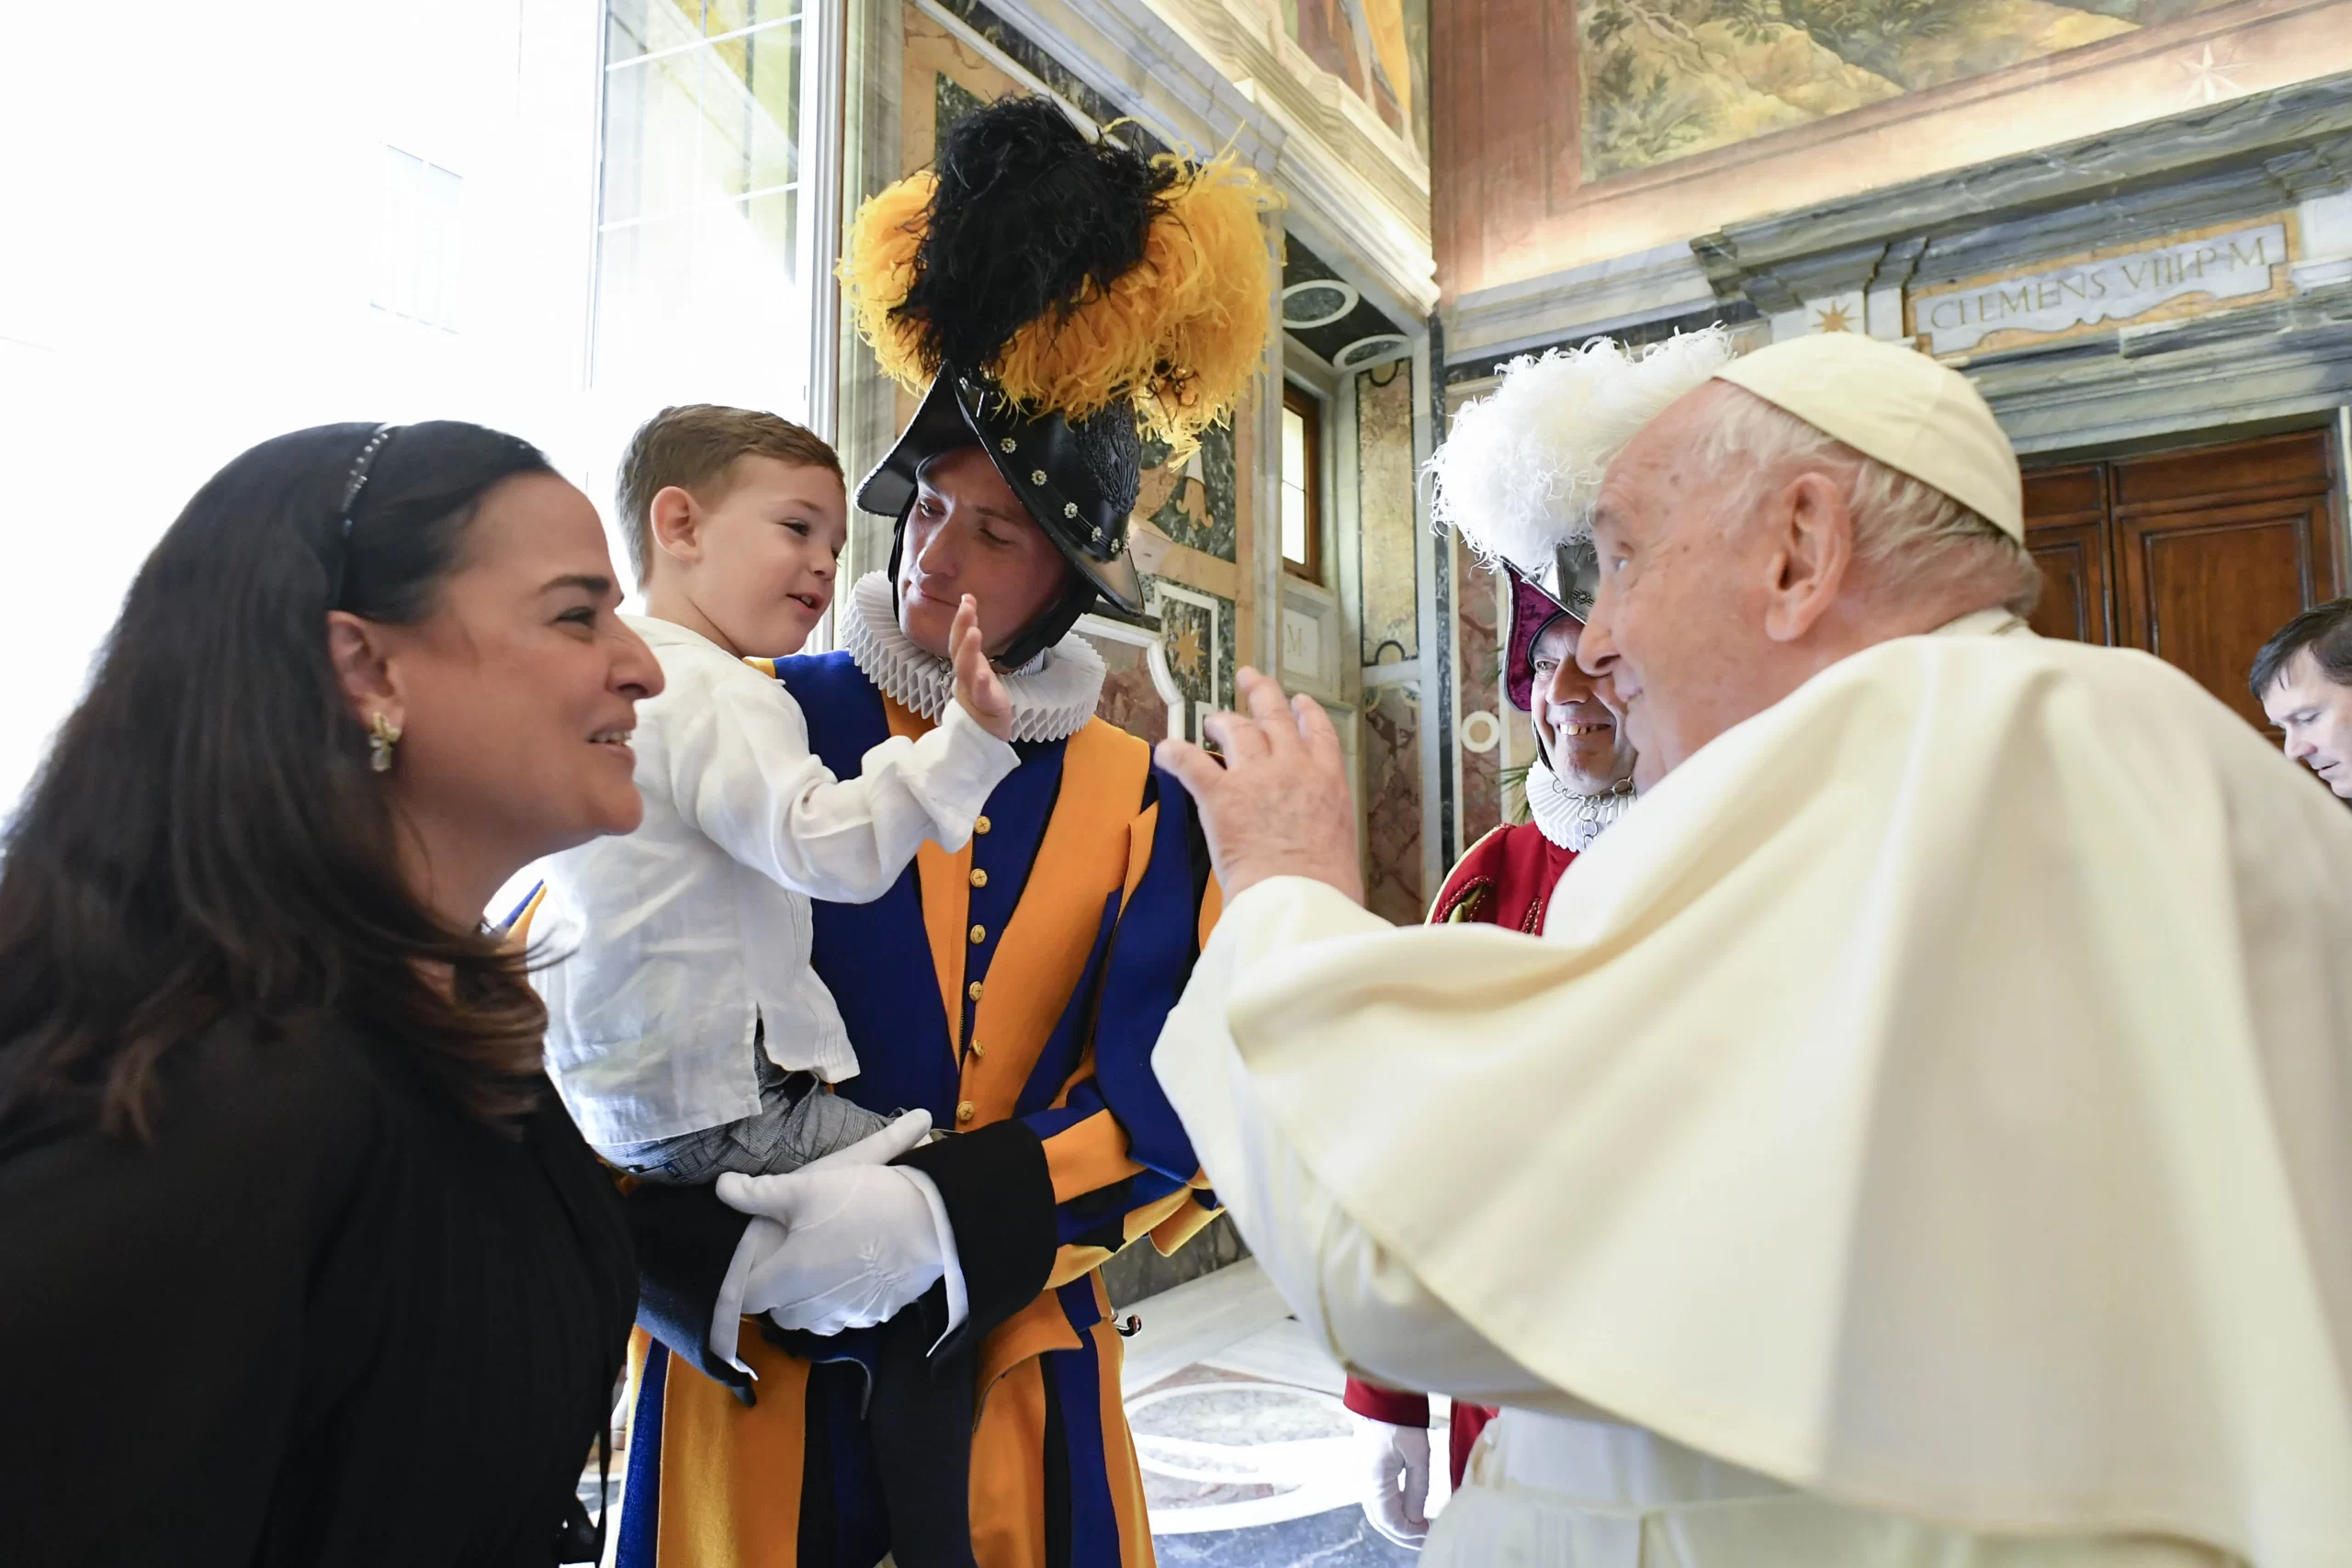 Pope Francis met members of the Swiss Guard and their families in the Apostolic Palace before the swearing-in of the new recruits on May 6, 2023. Vatican Media